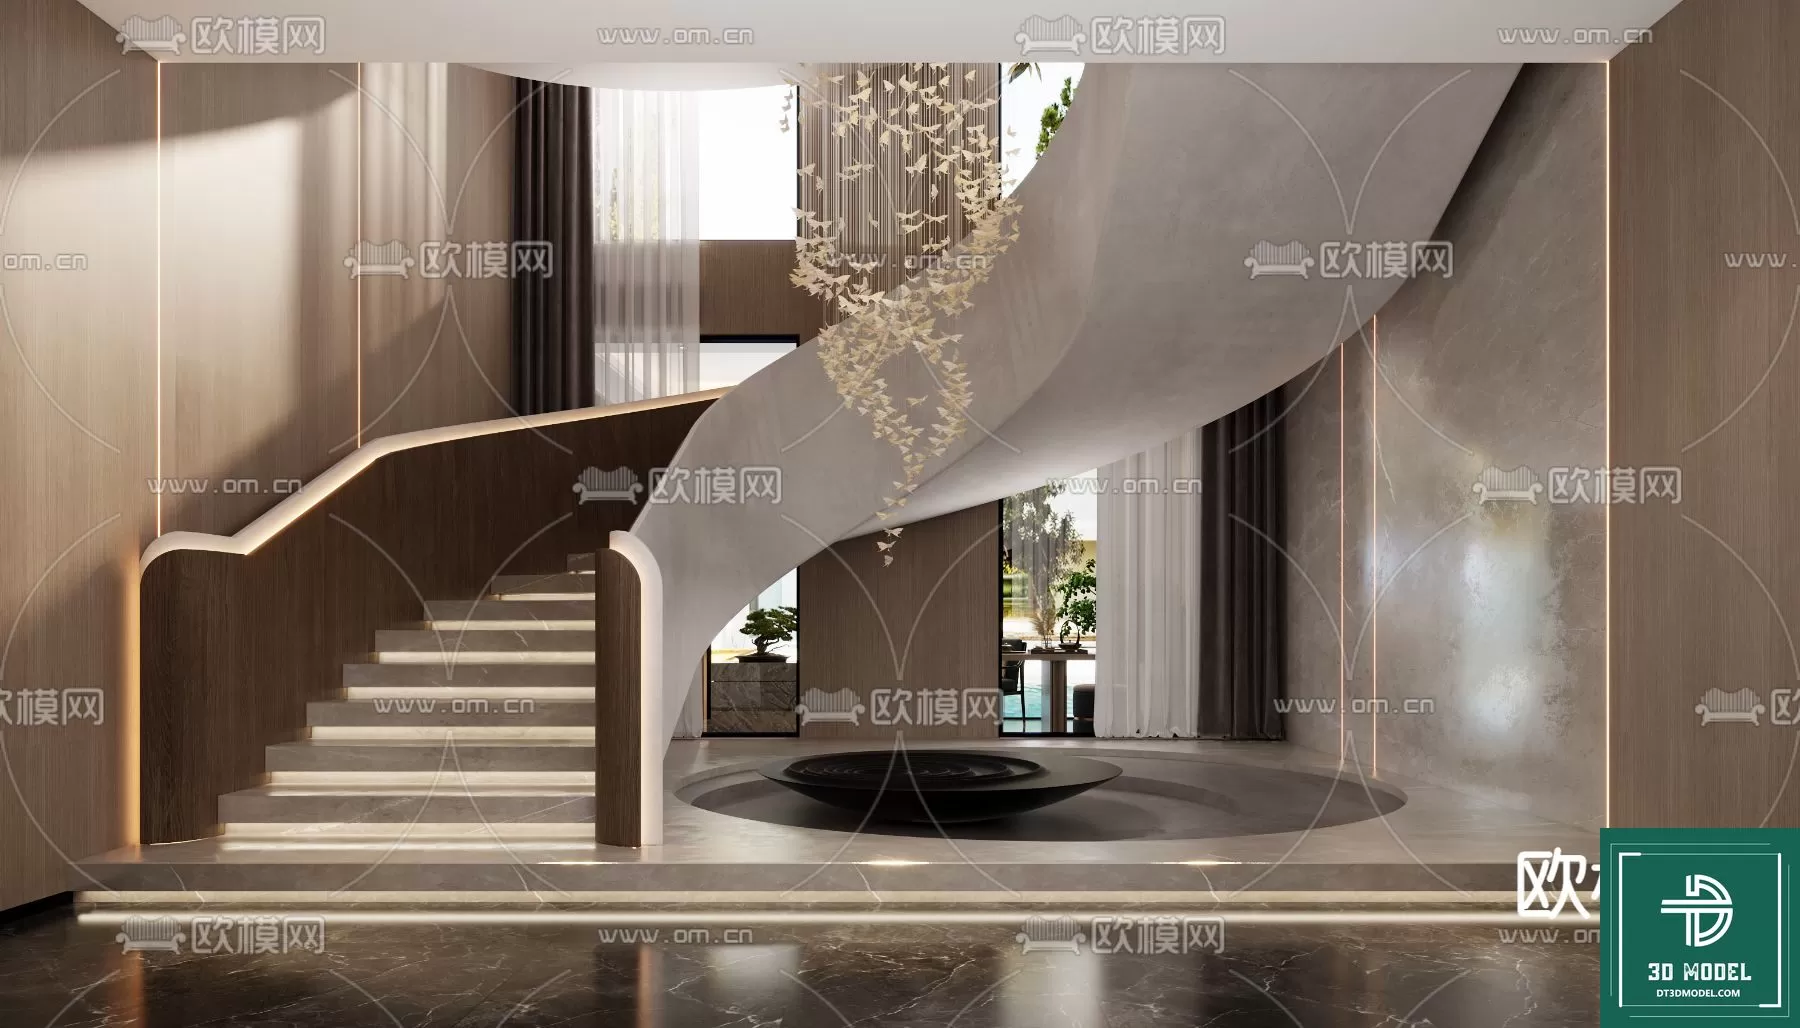 STAIR – 3DS MAX MODELS – 057 – PRO